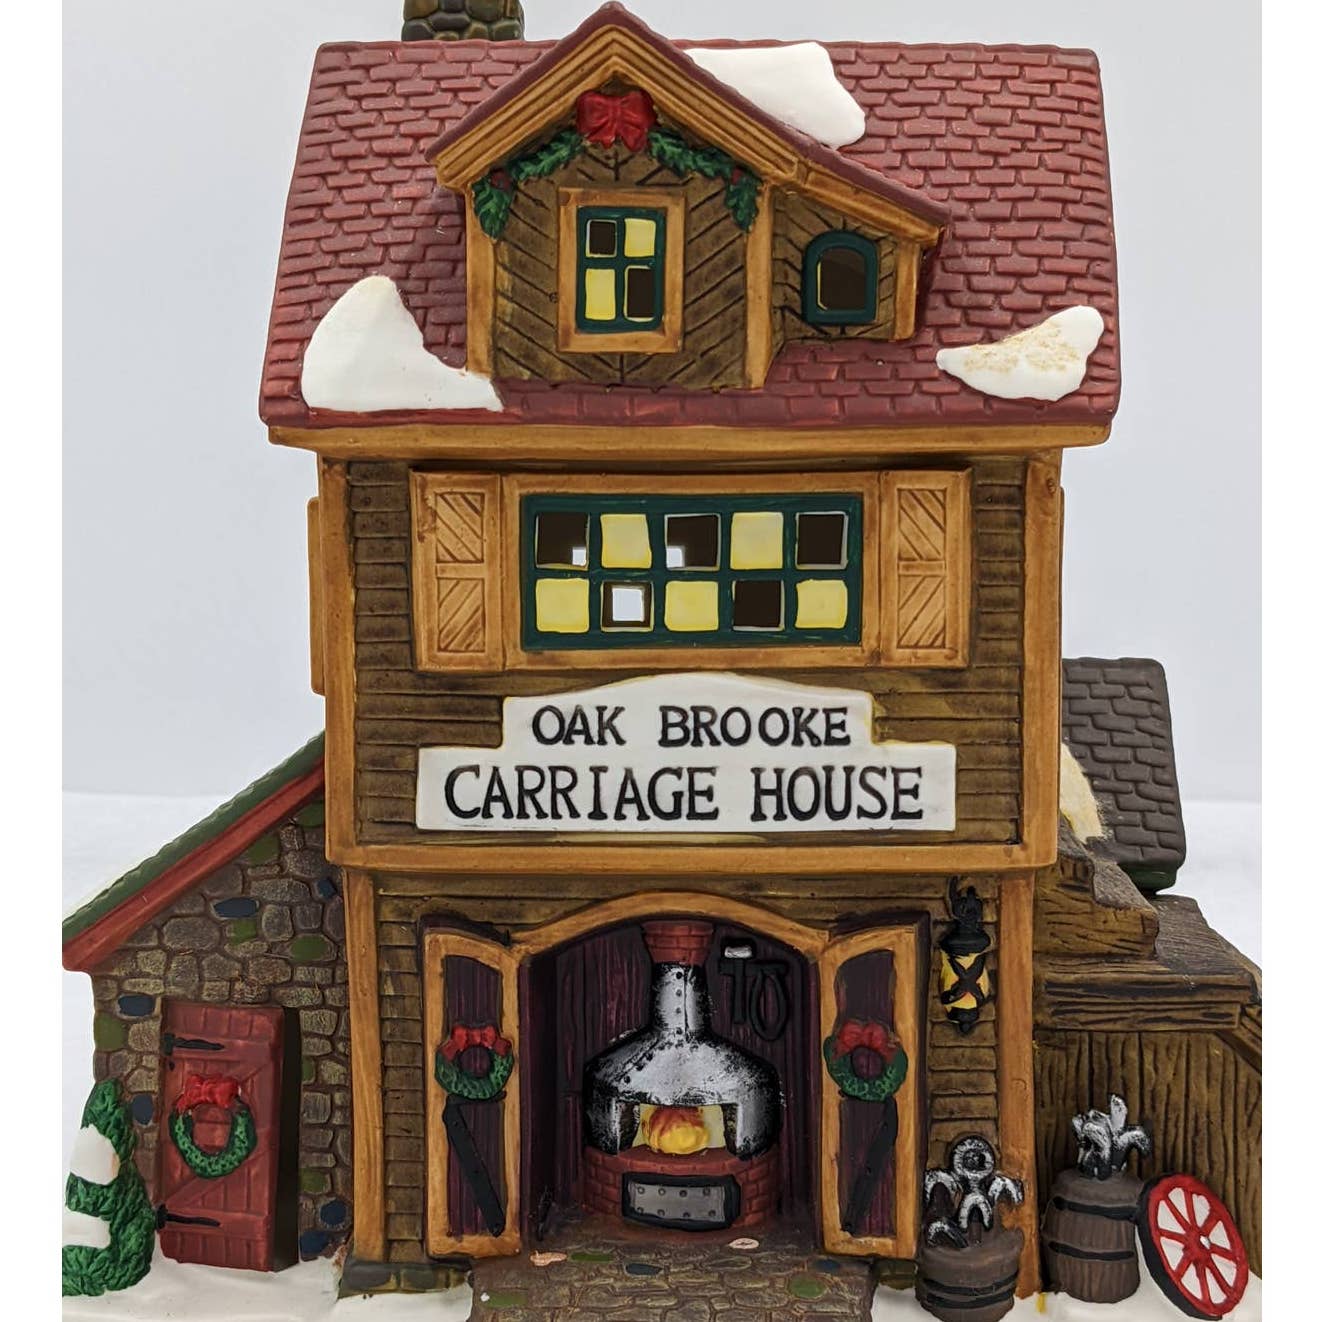 The Joy of Christmas Villages: Exploring the Psychology Behind Collecting Miniature Winter Wonderlands